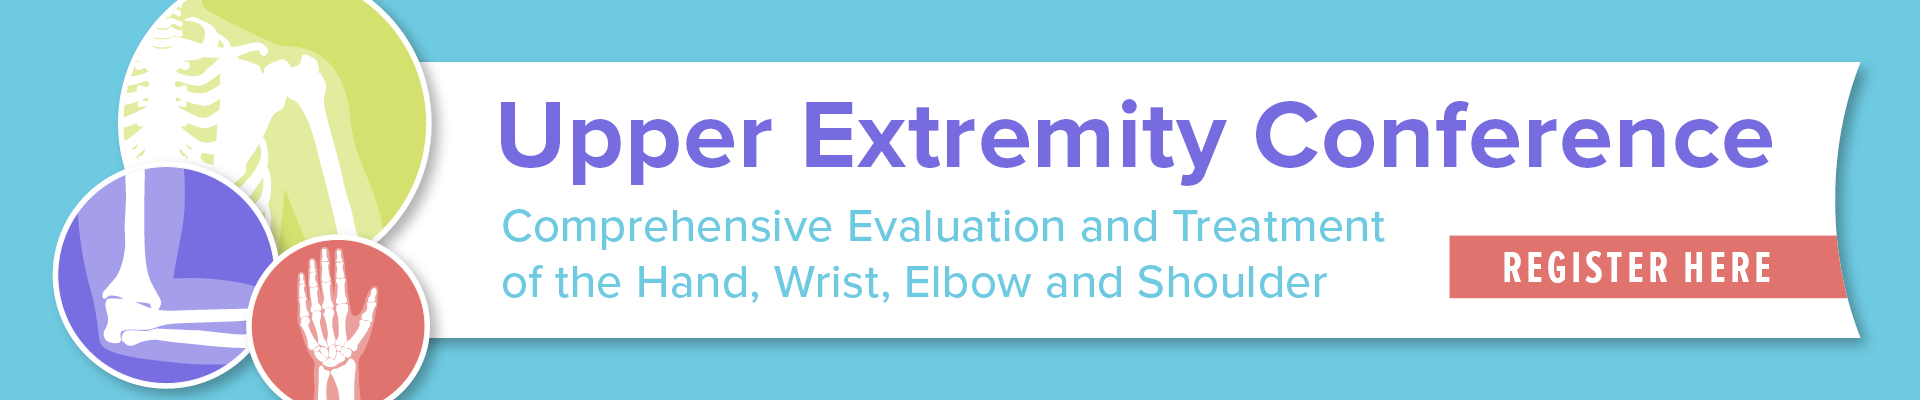 Upper Extremity Conference: Comprehensive Evaluation and Treatment of the Hand, Wrist, Elbow and Shoulder